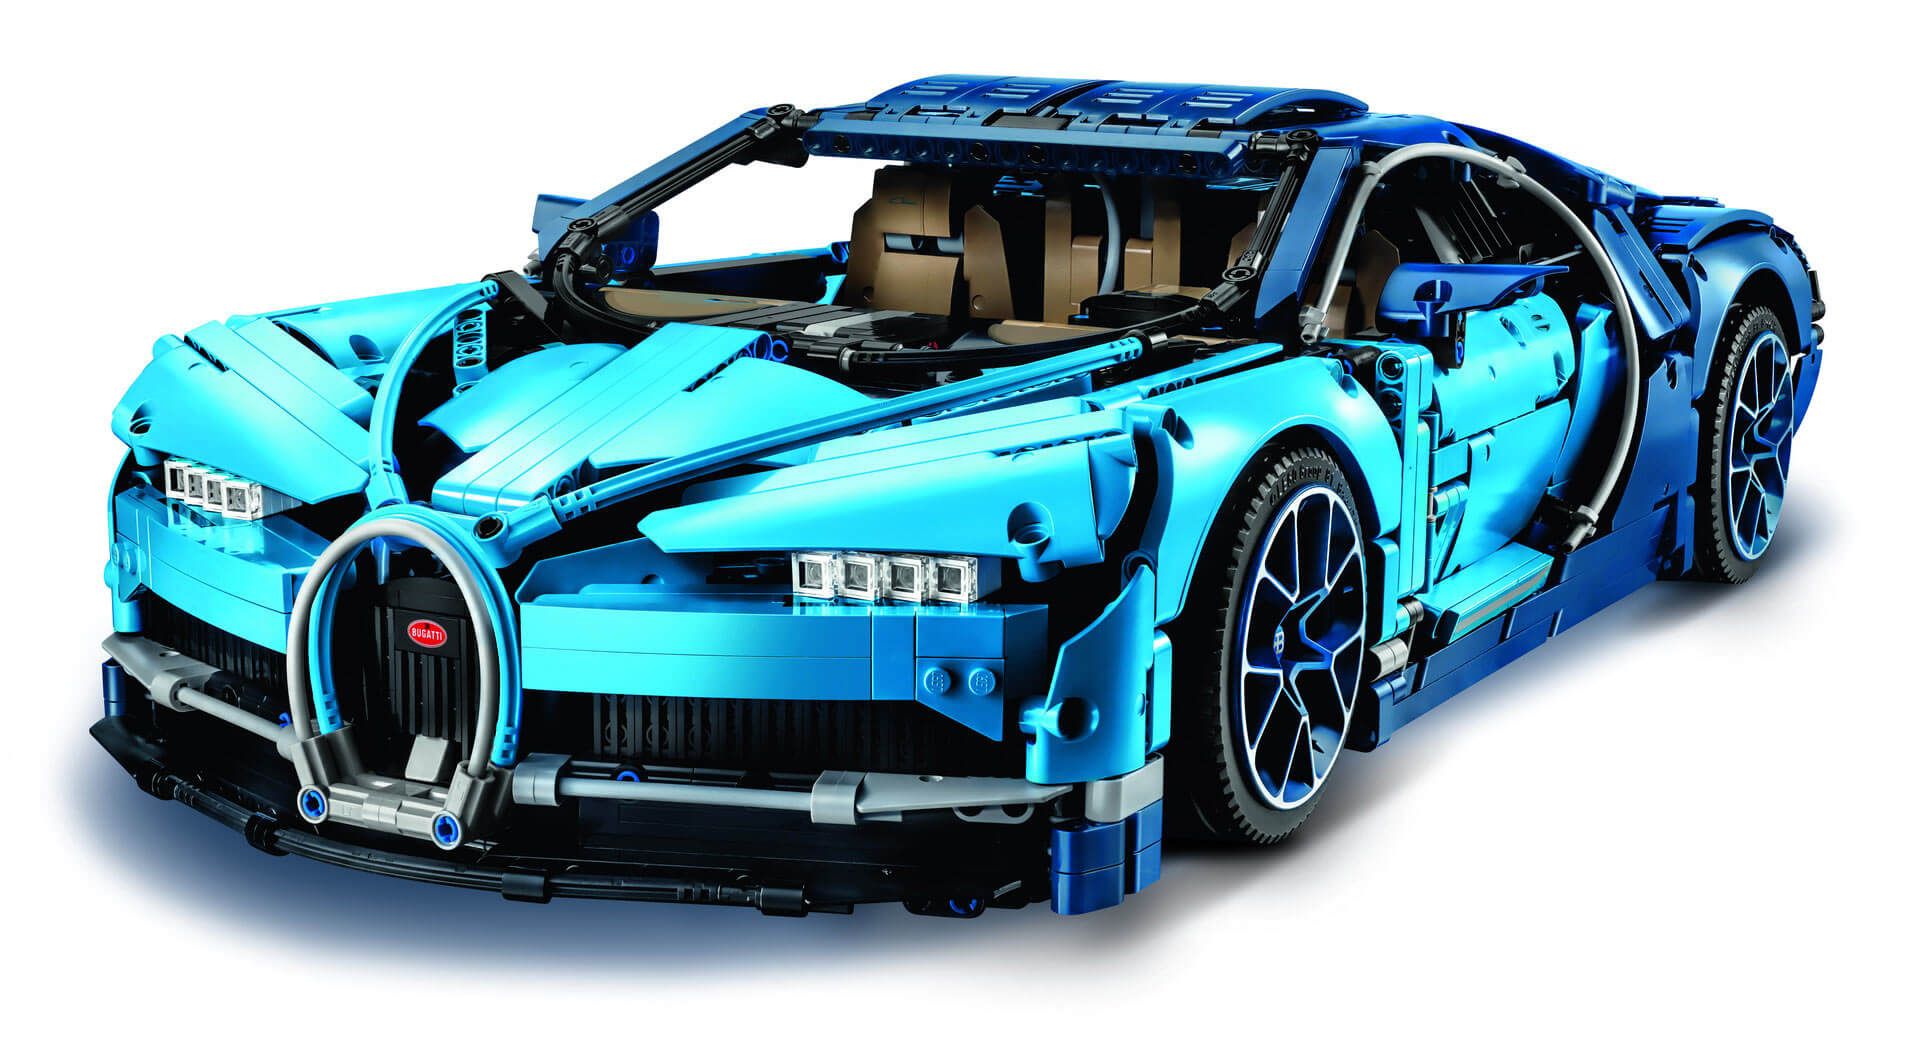 LEGO Technic's $350 Bugatti Chiron Is 3,600 Pieces Of Awesomeness